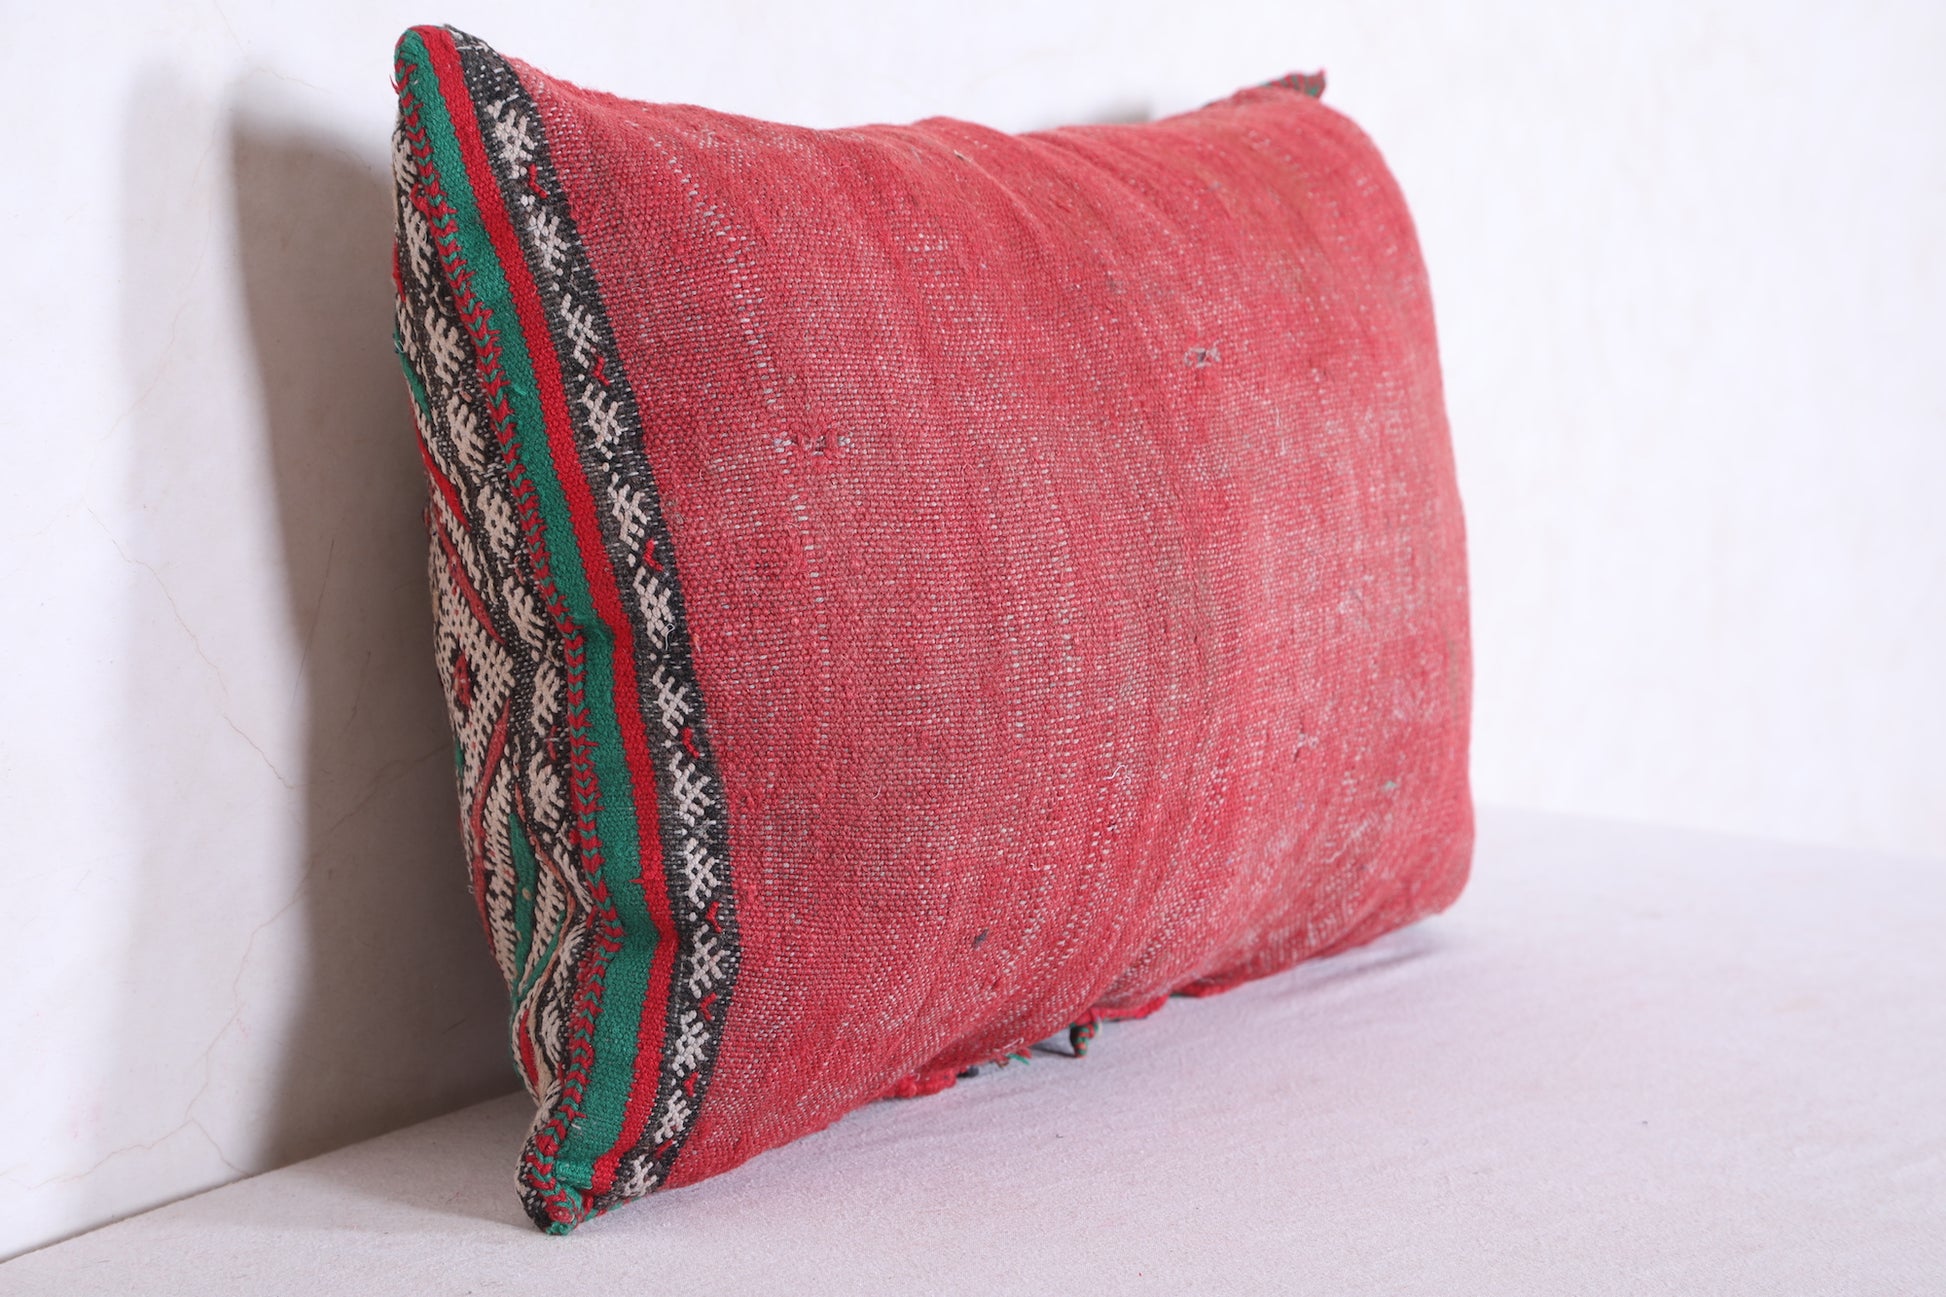 Moroccan handmade kilim pillow 17.3 INCHES X 24 INCHES